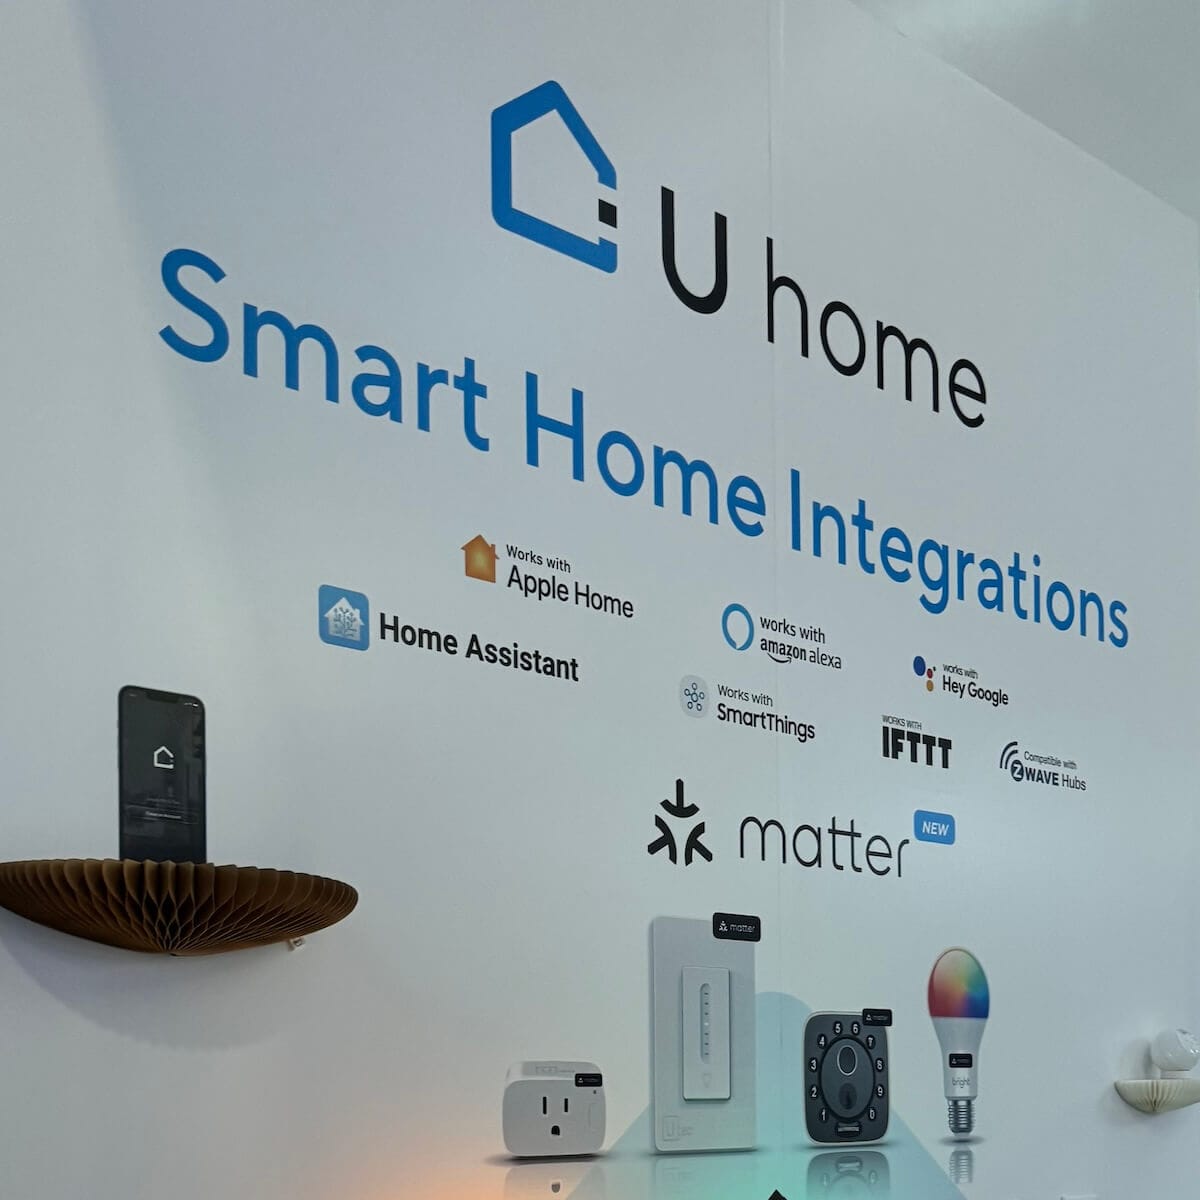 Banner at a booth showing that the U-home products are compatible with Apple, Amazon, Google, Home Assistant and SmartThings.